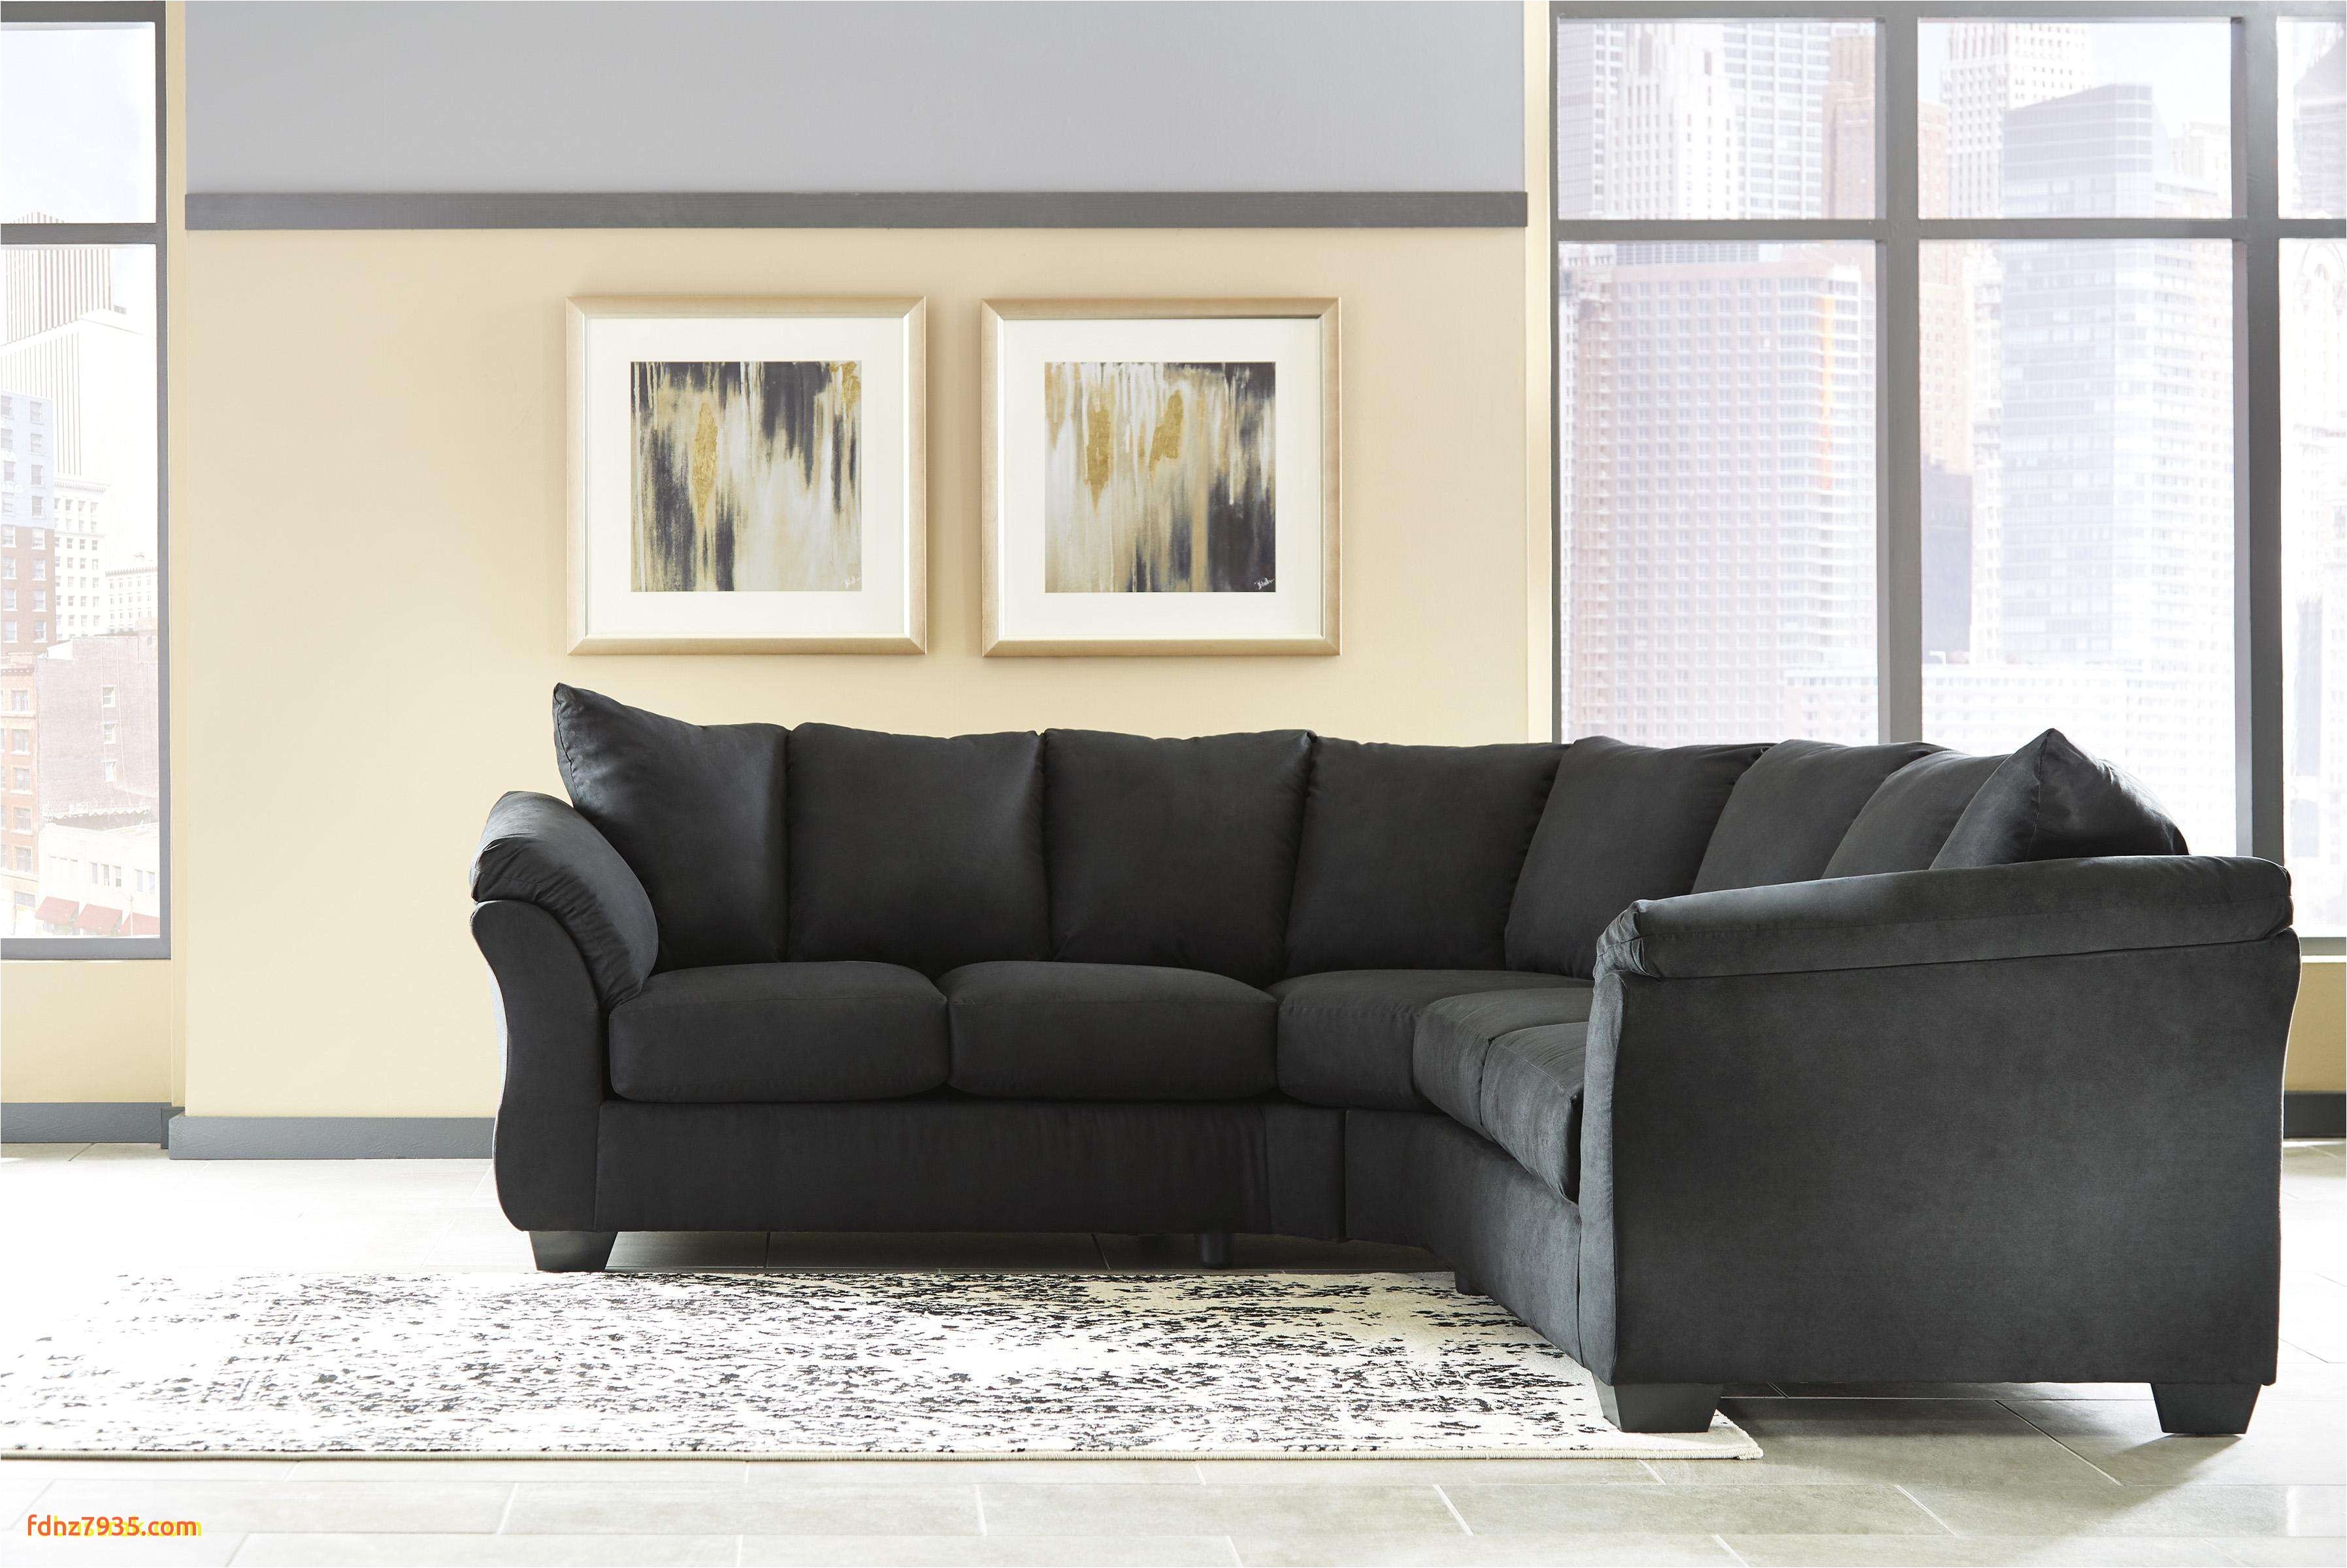 Best Place to Buy Leather sofa Sectional Small Sectional Leather sofa Fresh sofa Design